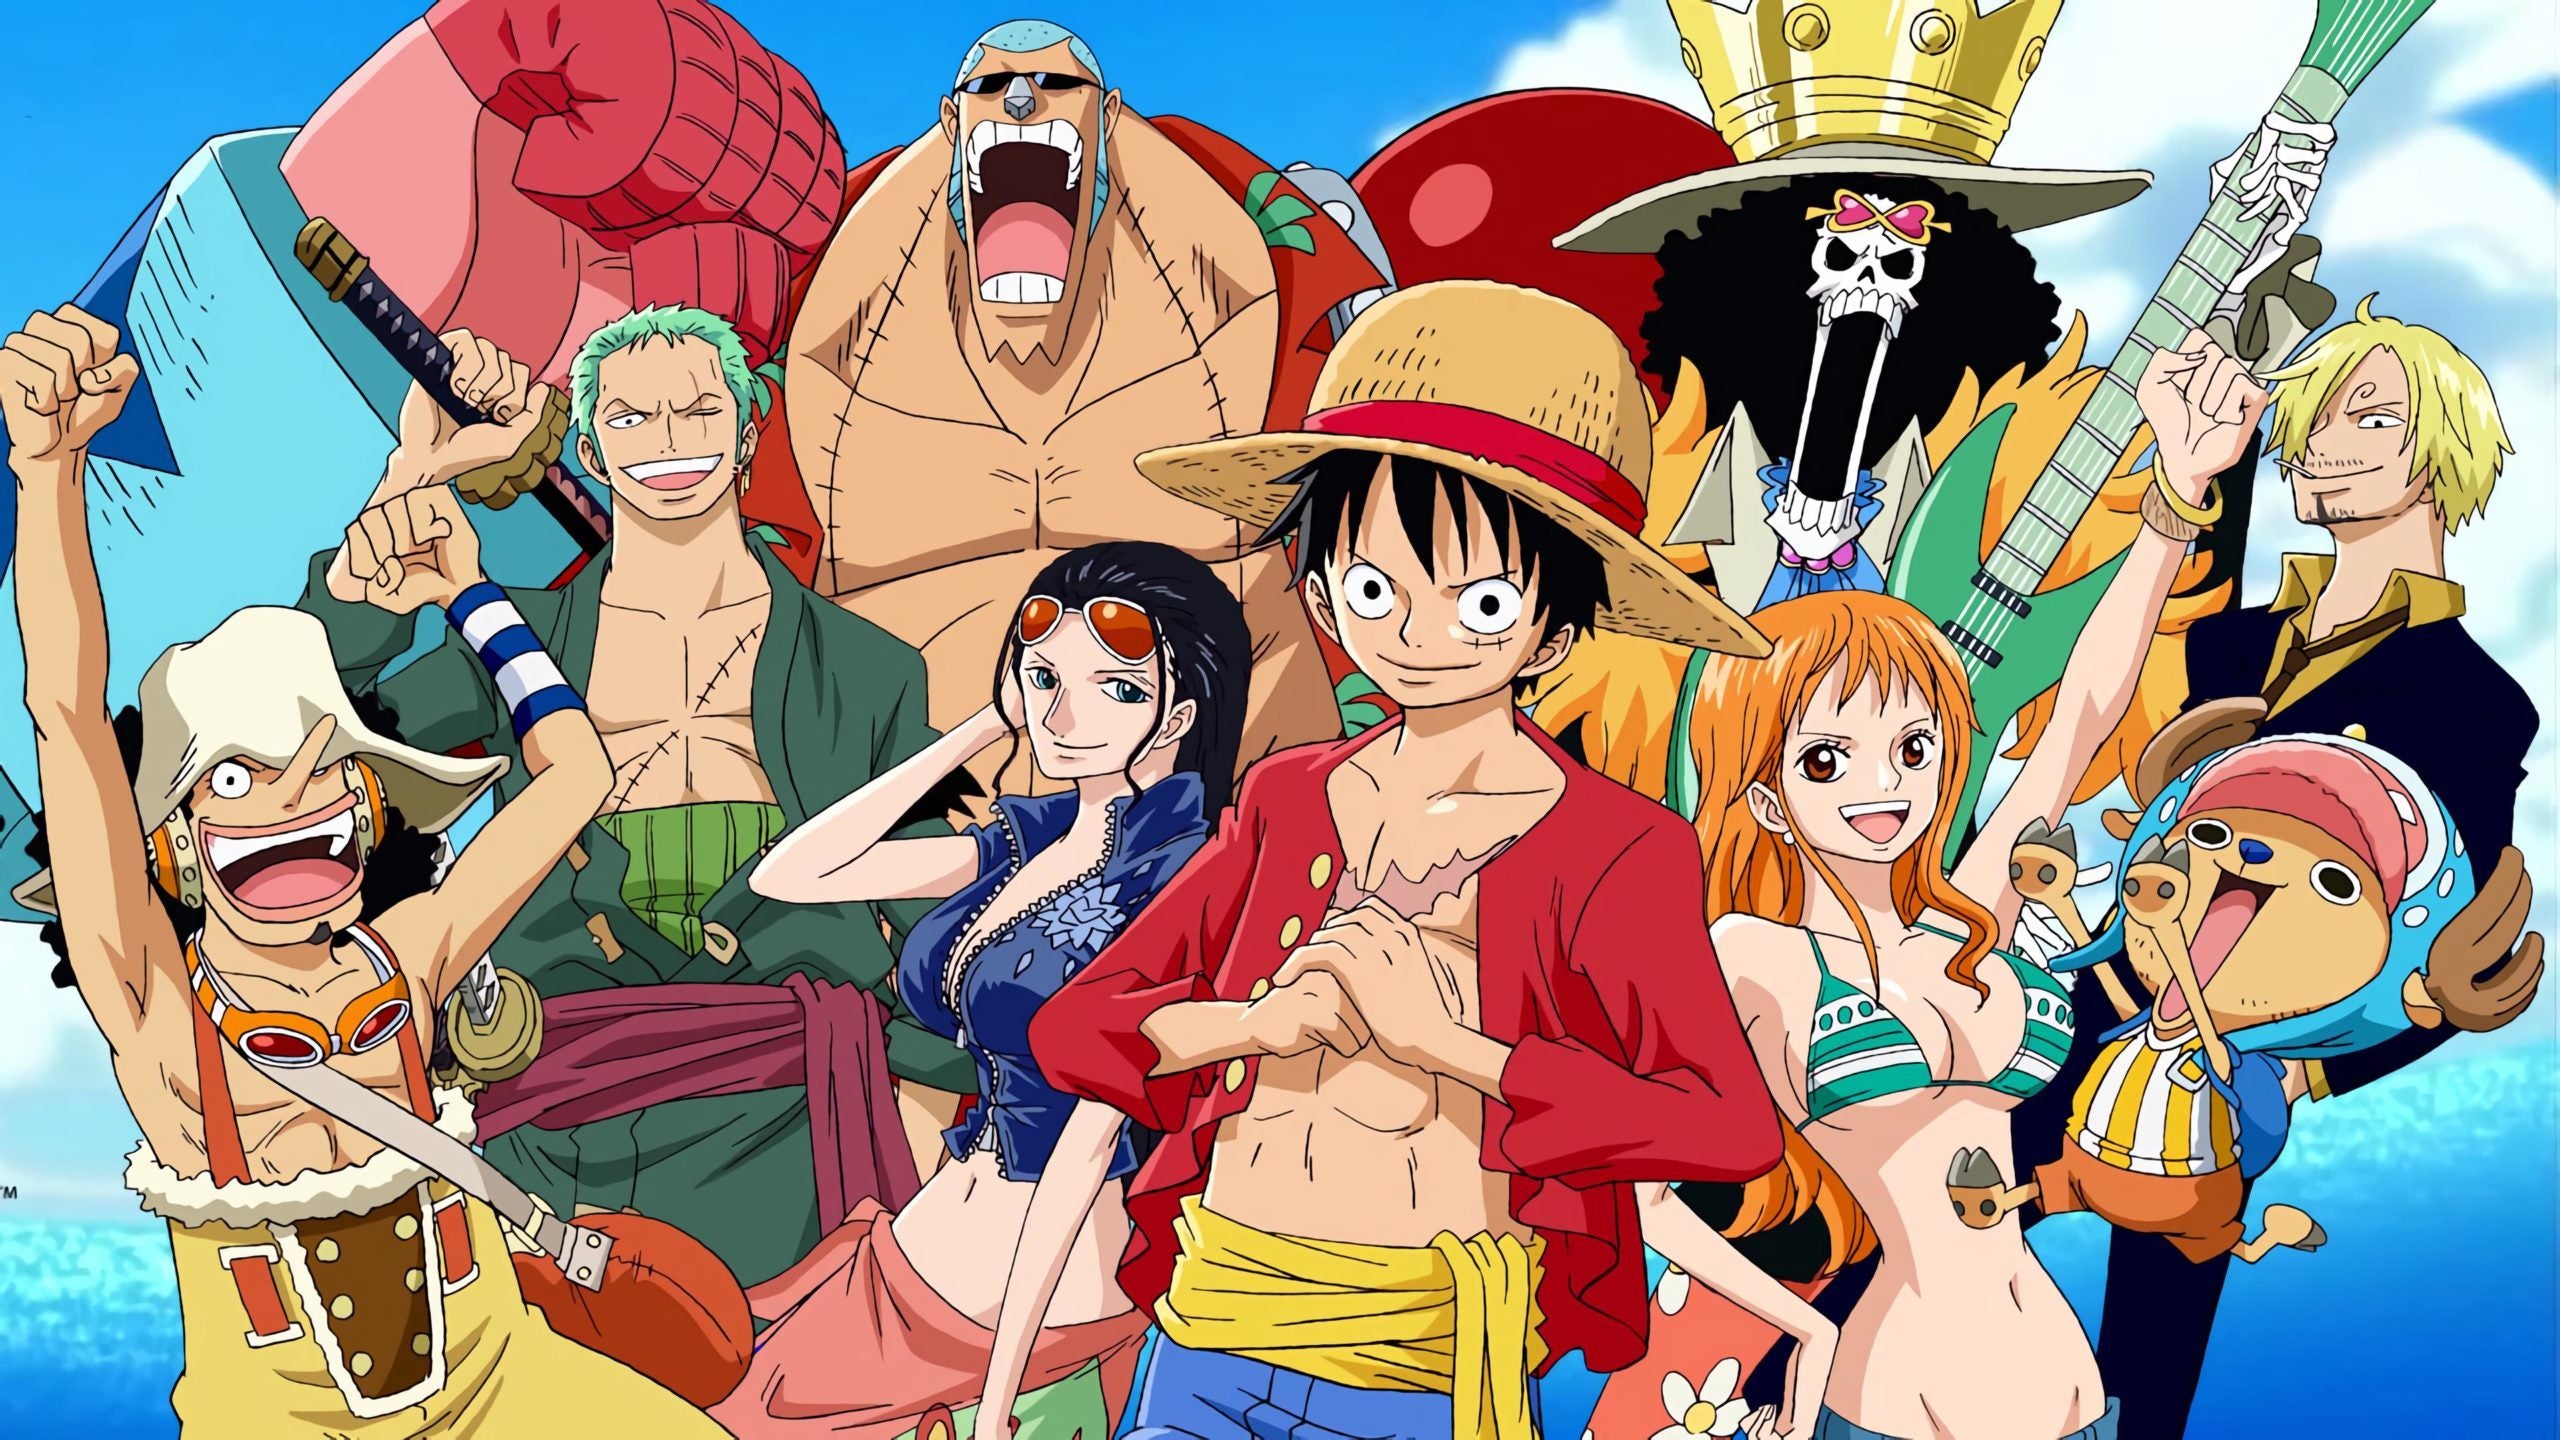 We Are One Piece S Tatsuya Nagamine Gives Us The Inside Scoop On The Legendary Anime The Hundreds